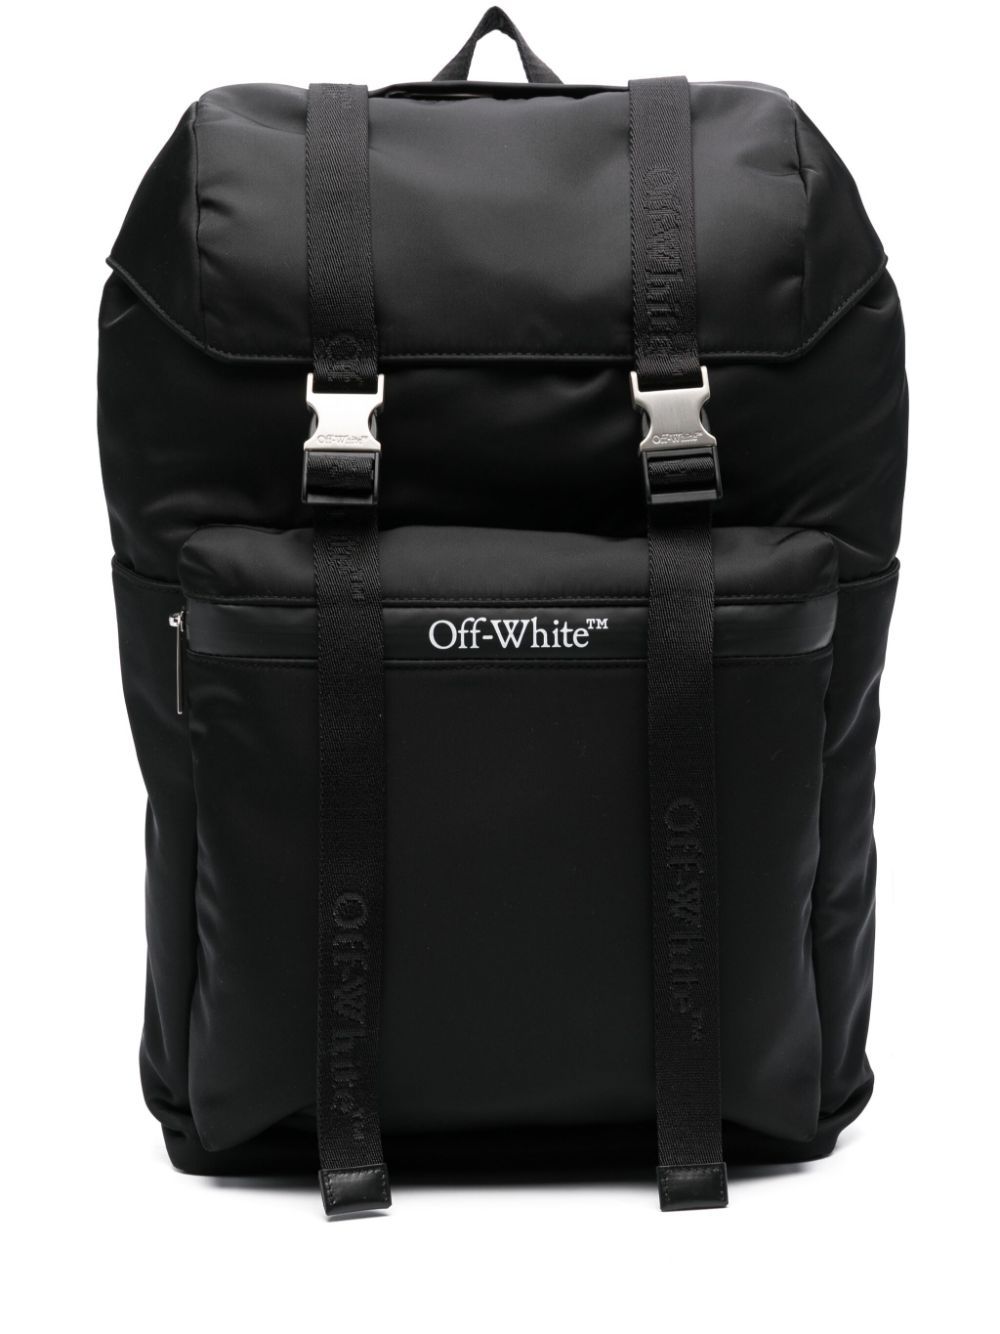 Off-white Outdoor Drawstring Backpack Black